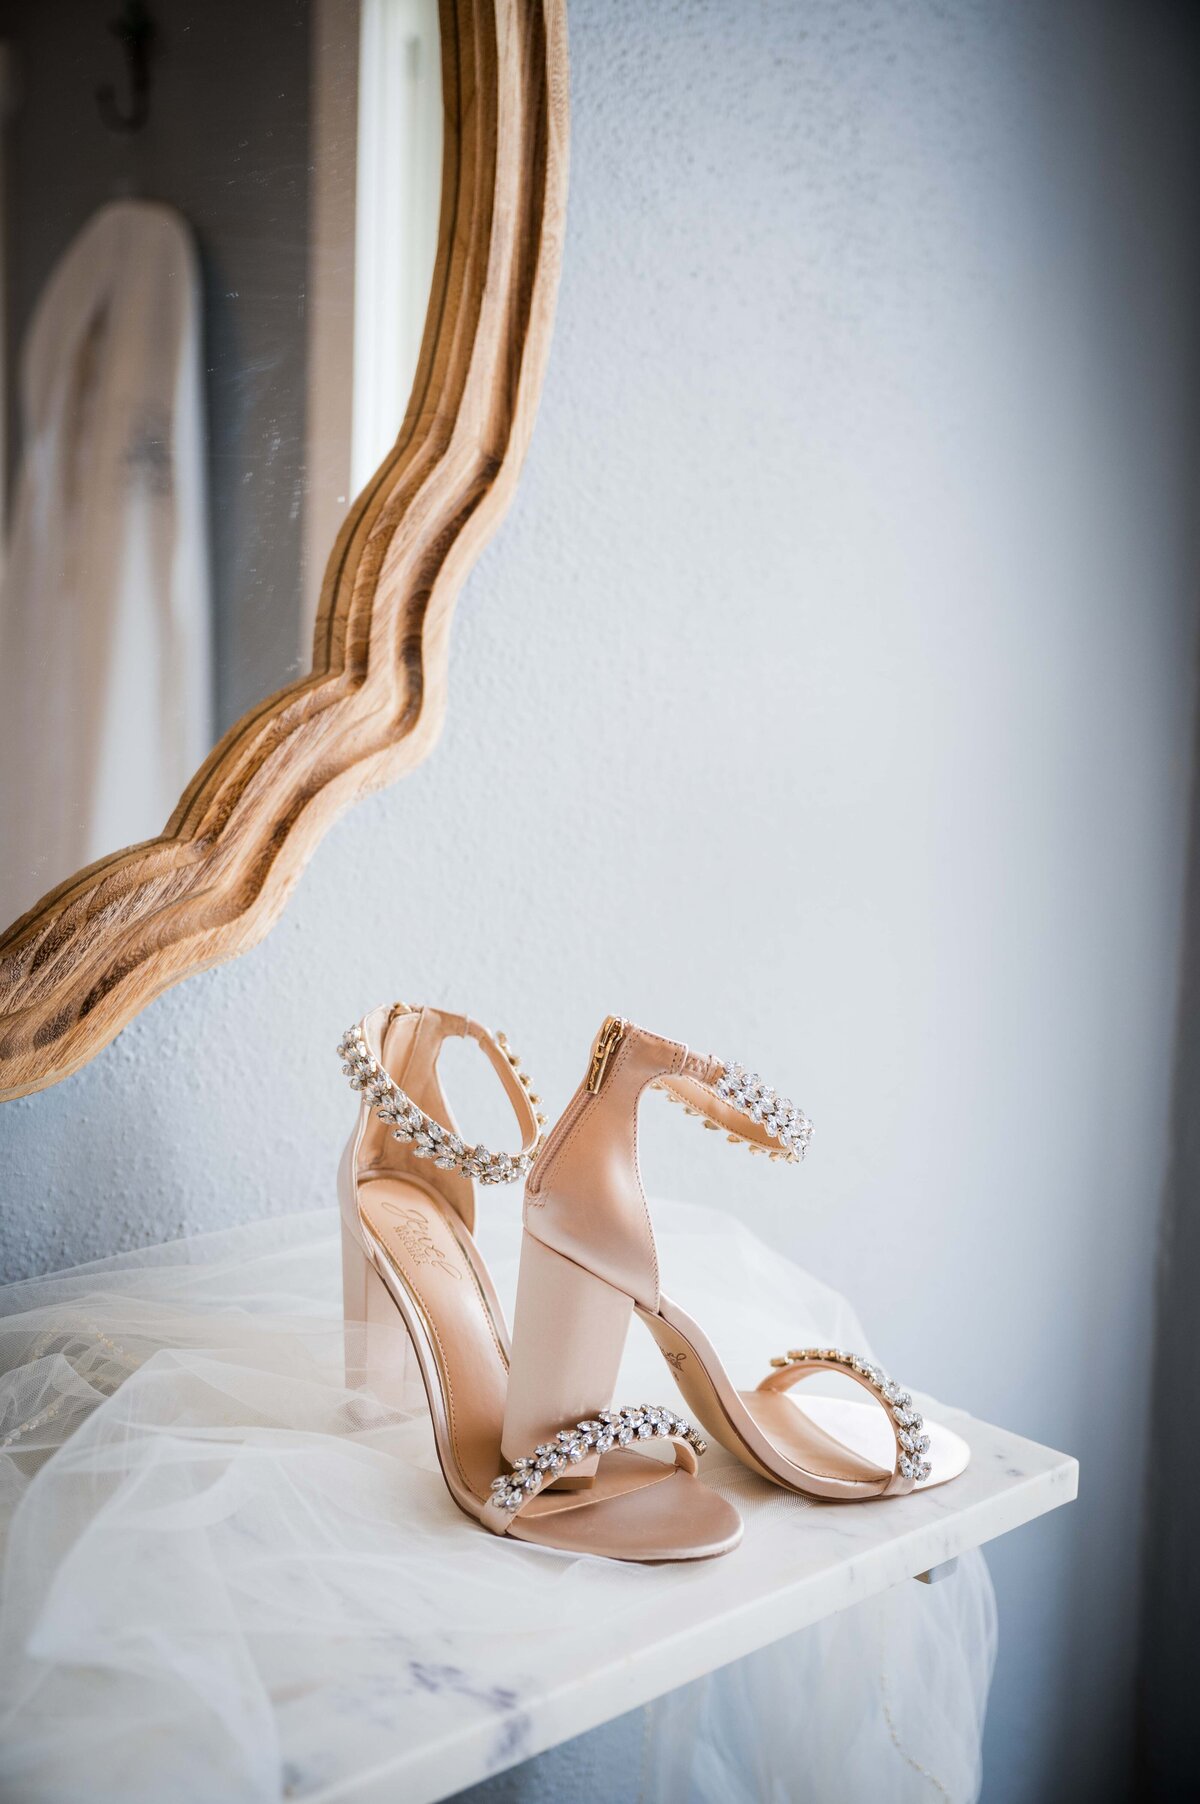 A pair of ornate wedding shoes sitting on a marble table with an ornate mirror in the background.